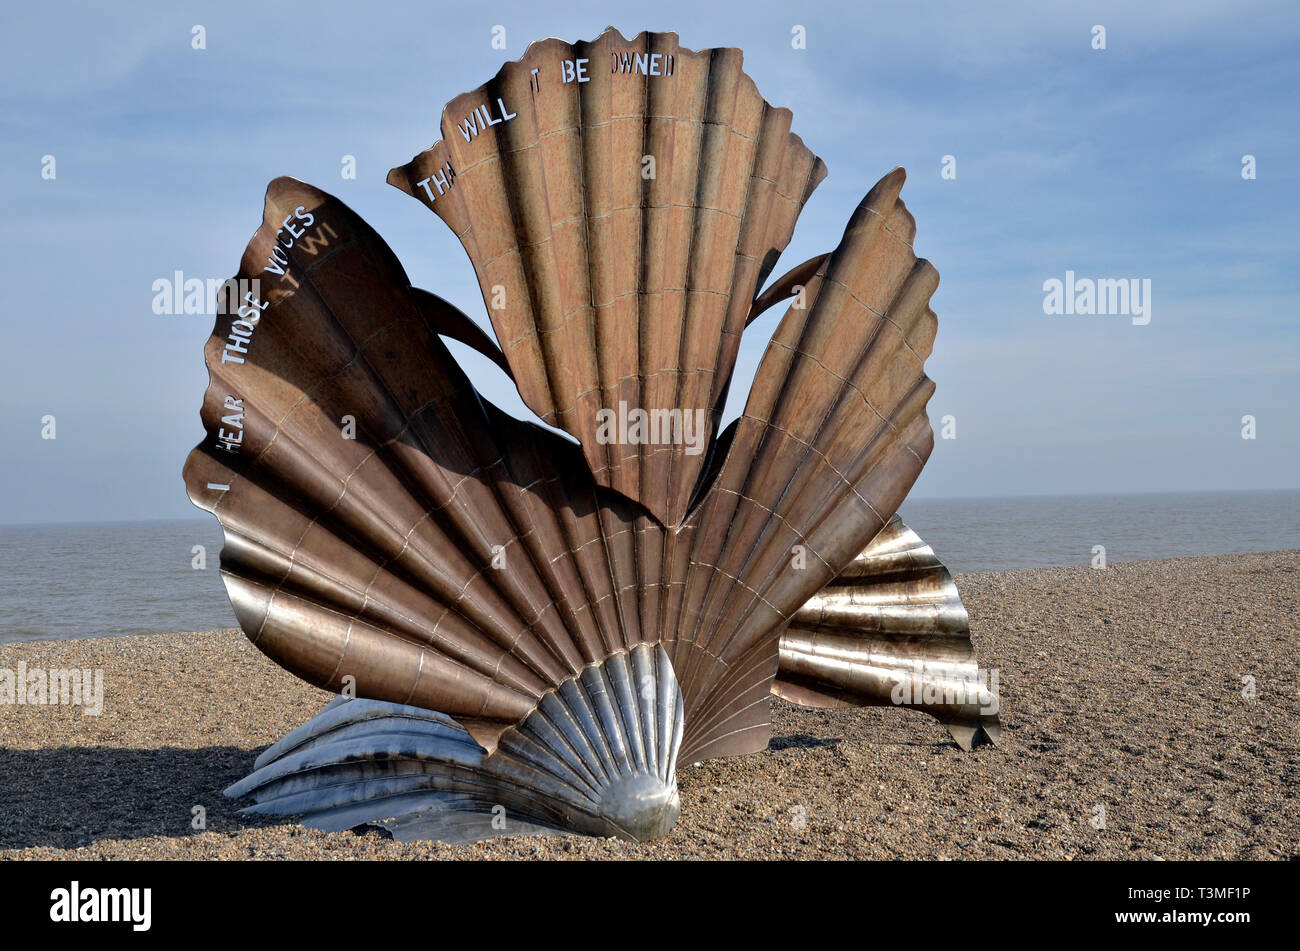 The Scallop sculpture on the beach at Aldeburgh. By local artist Maggi Hambling, it commemorates Benjamin Britten's association with the area. Stock Photo